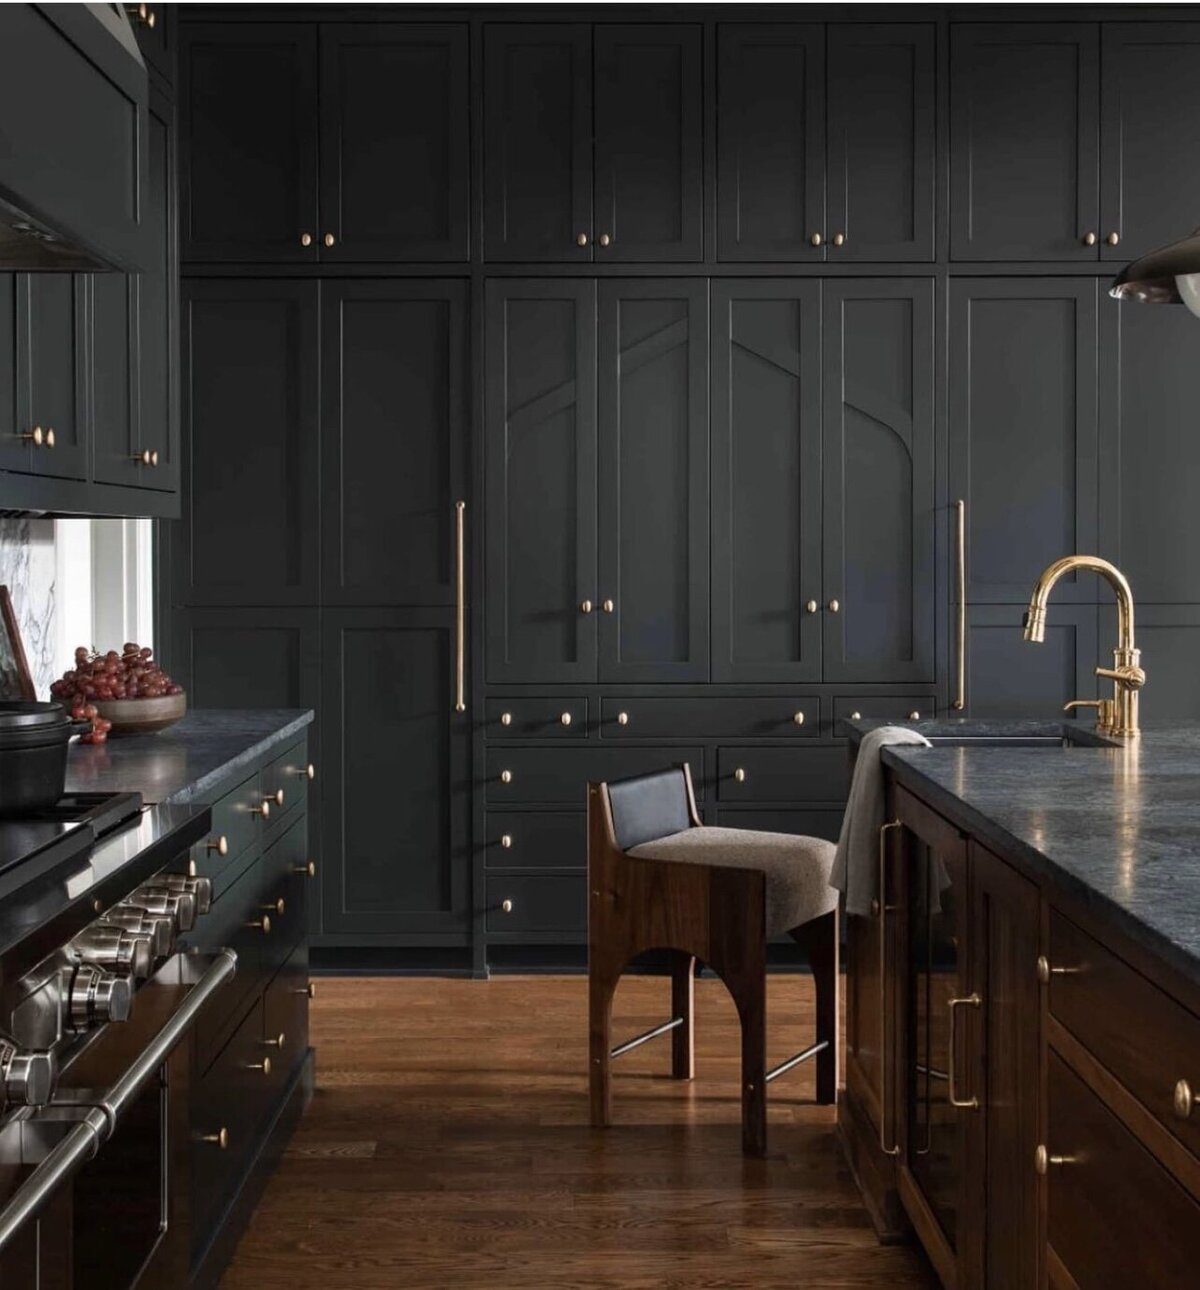 Beautiful kitchen with dark cabinets and gold hardware trendy for remodels shown by Craig Lerch